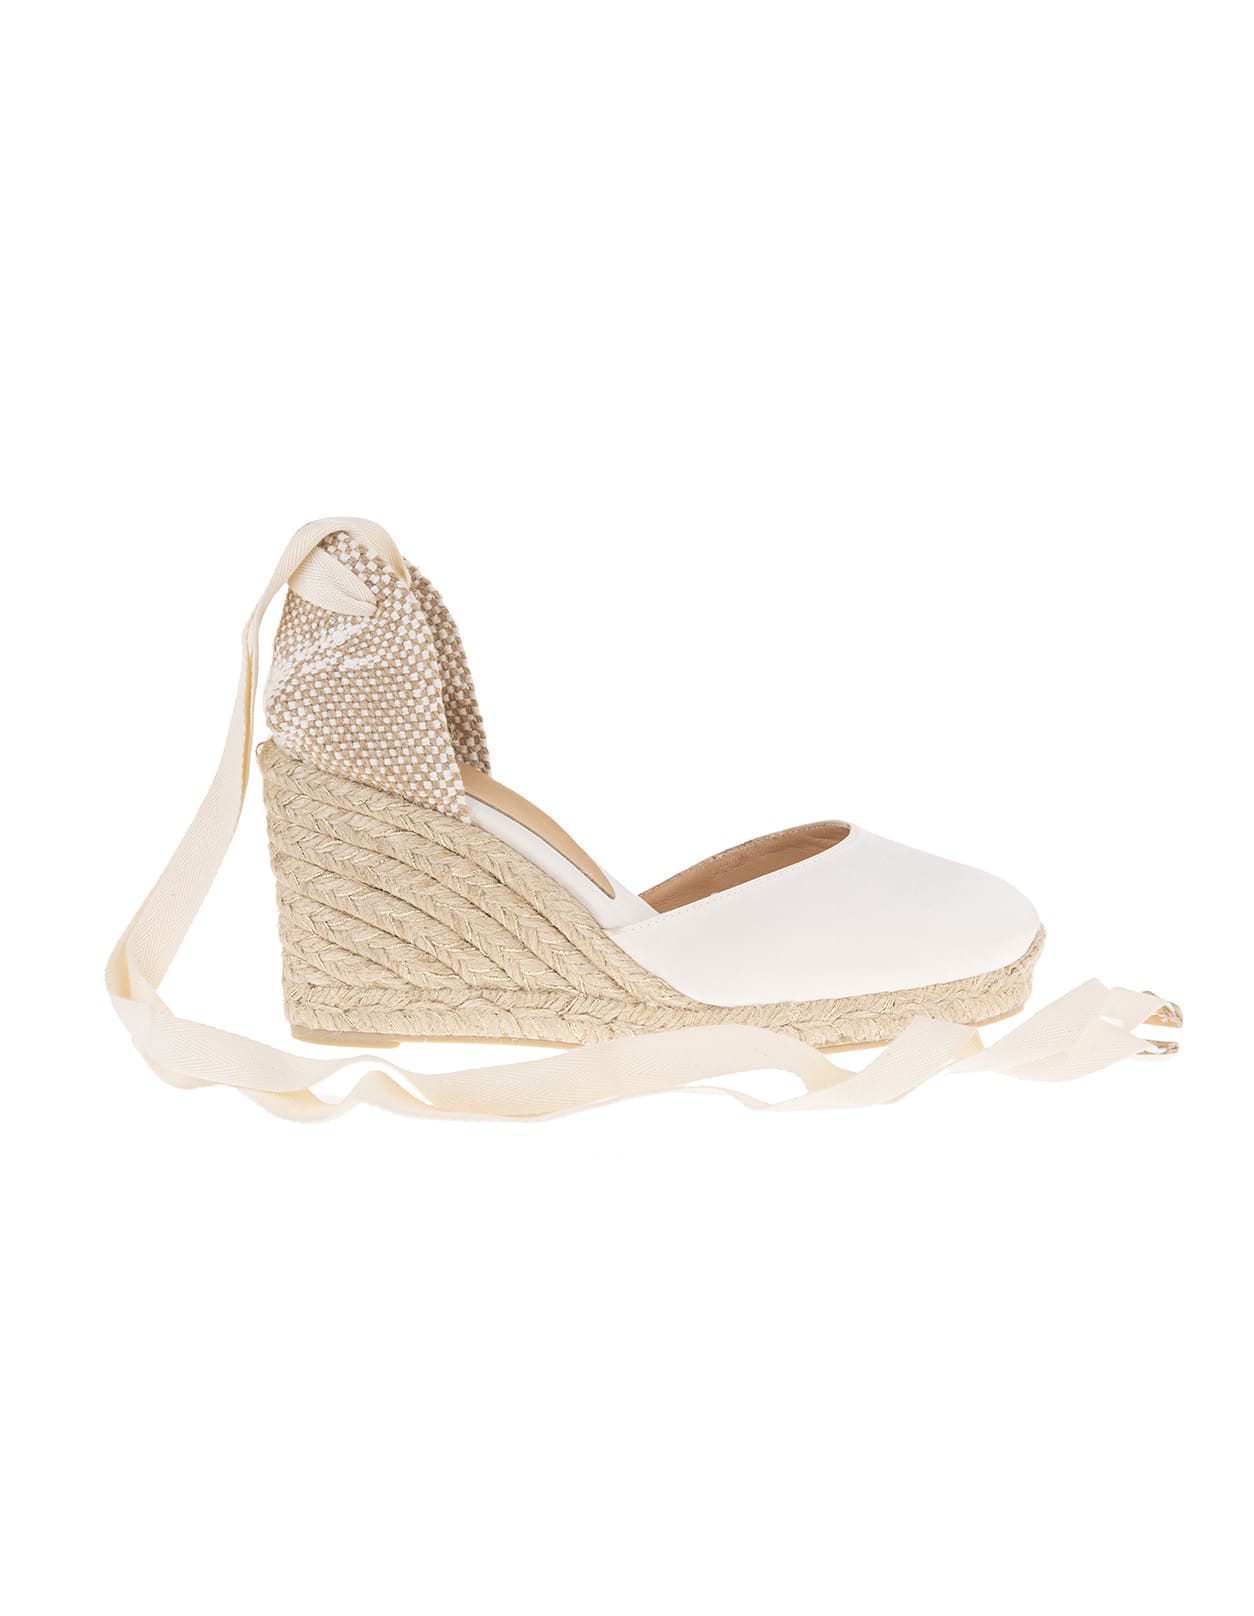 Castañer Carina Espadrille In White Canvas With Wedge